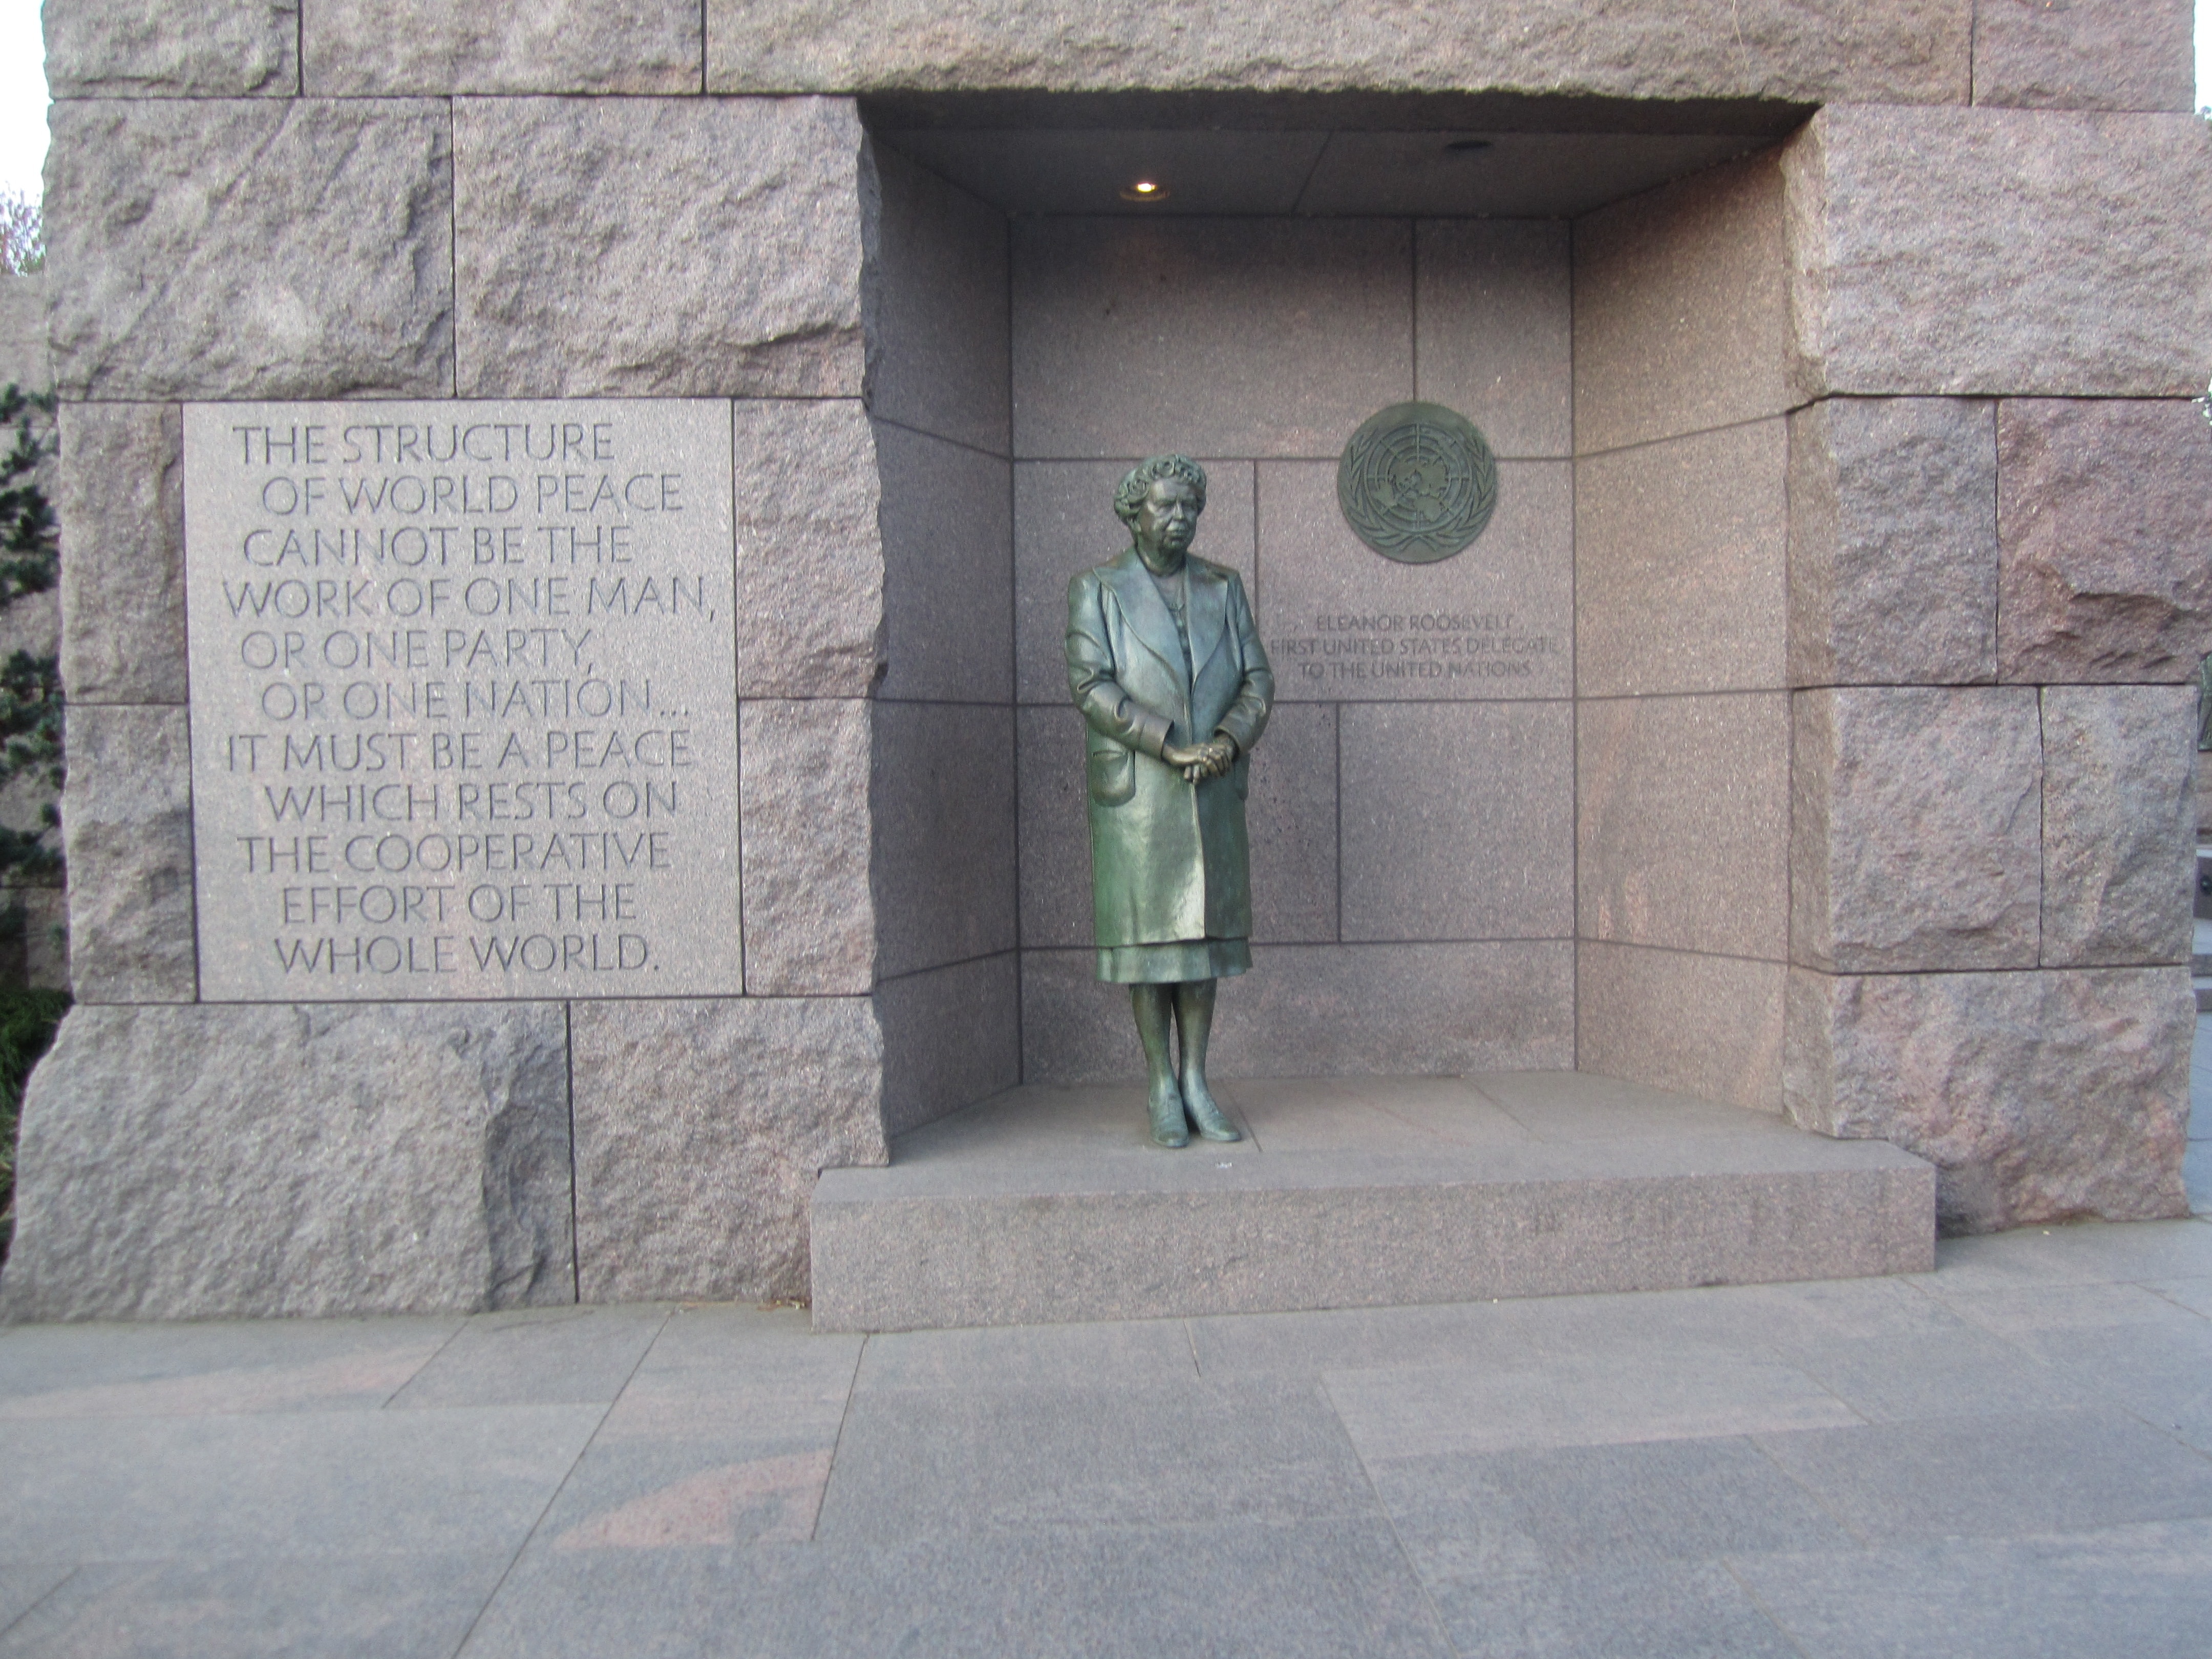 Eleanor Roosevelt at the FDR Memorial in Washington DC